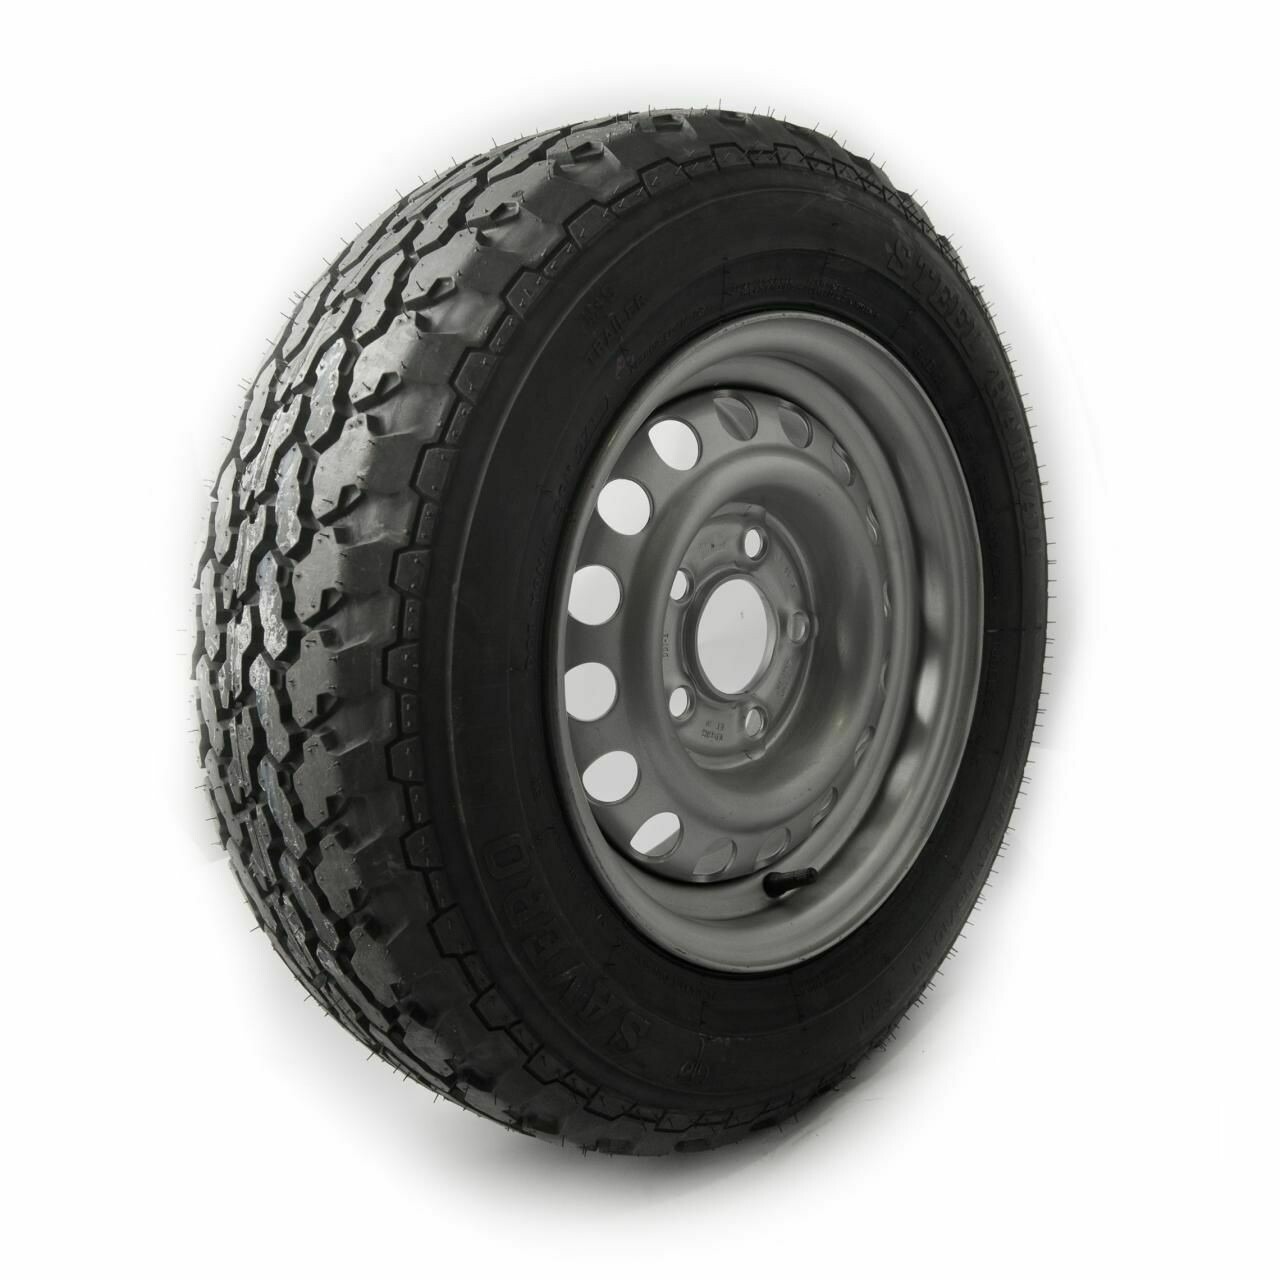 185 R 13 8ply (5 x 112mm pcd) trailer wheel and tyre